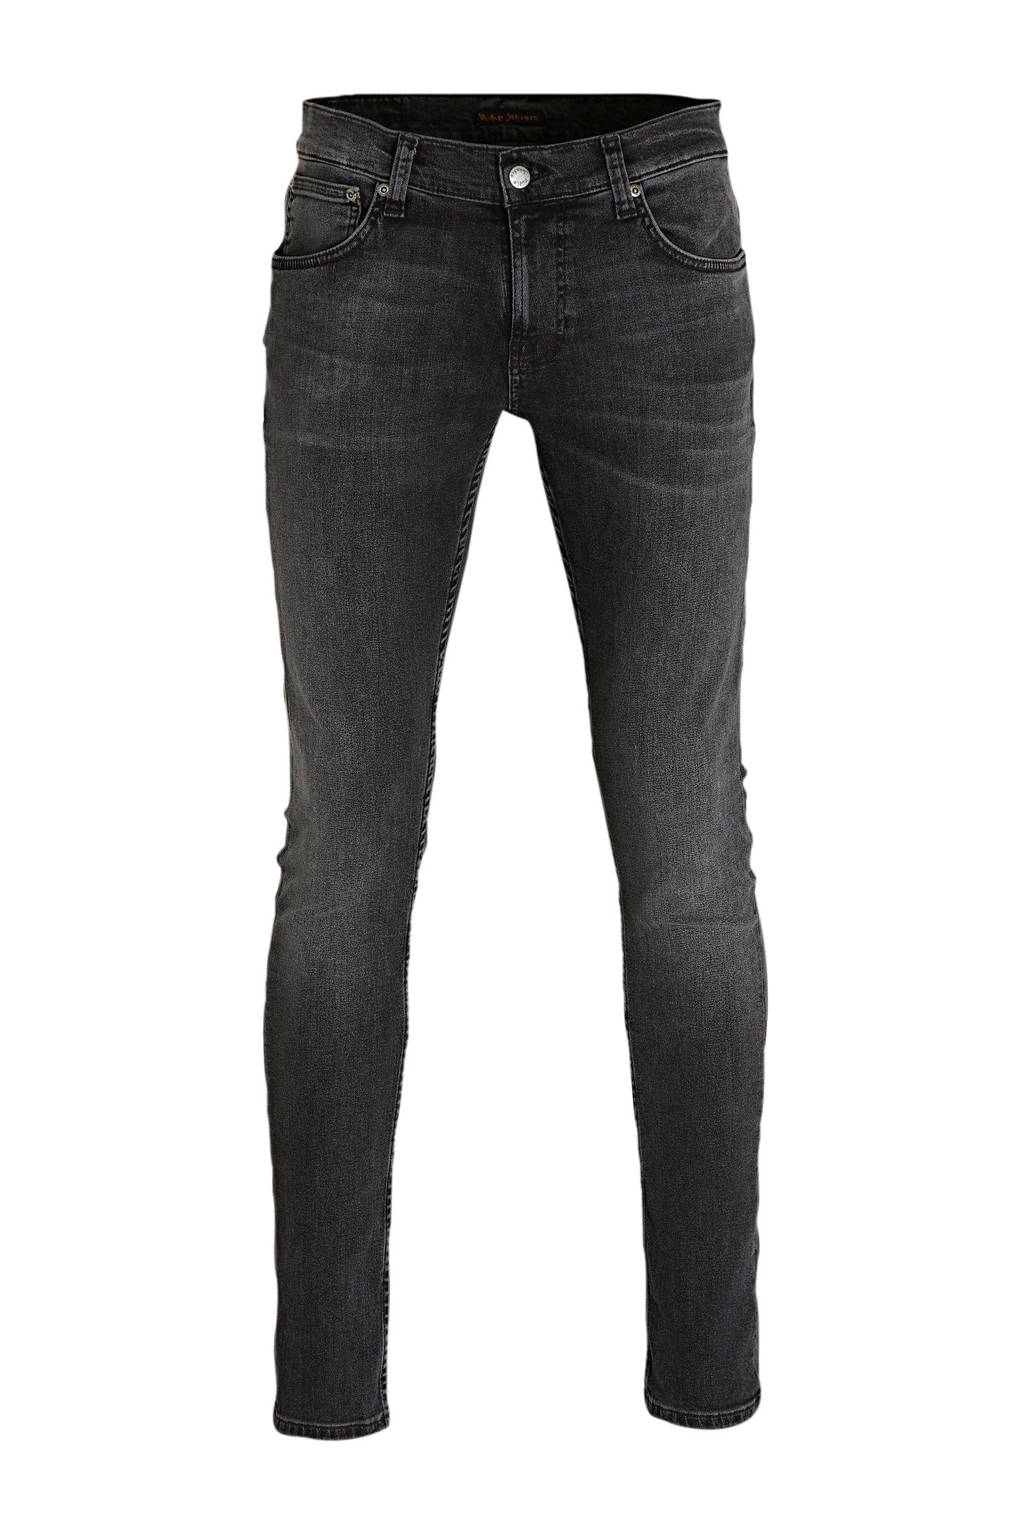 Nudie Jeans skinny fit jeans Tight Terry fade to grey, Fade To Grey